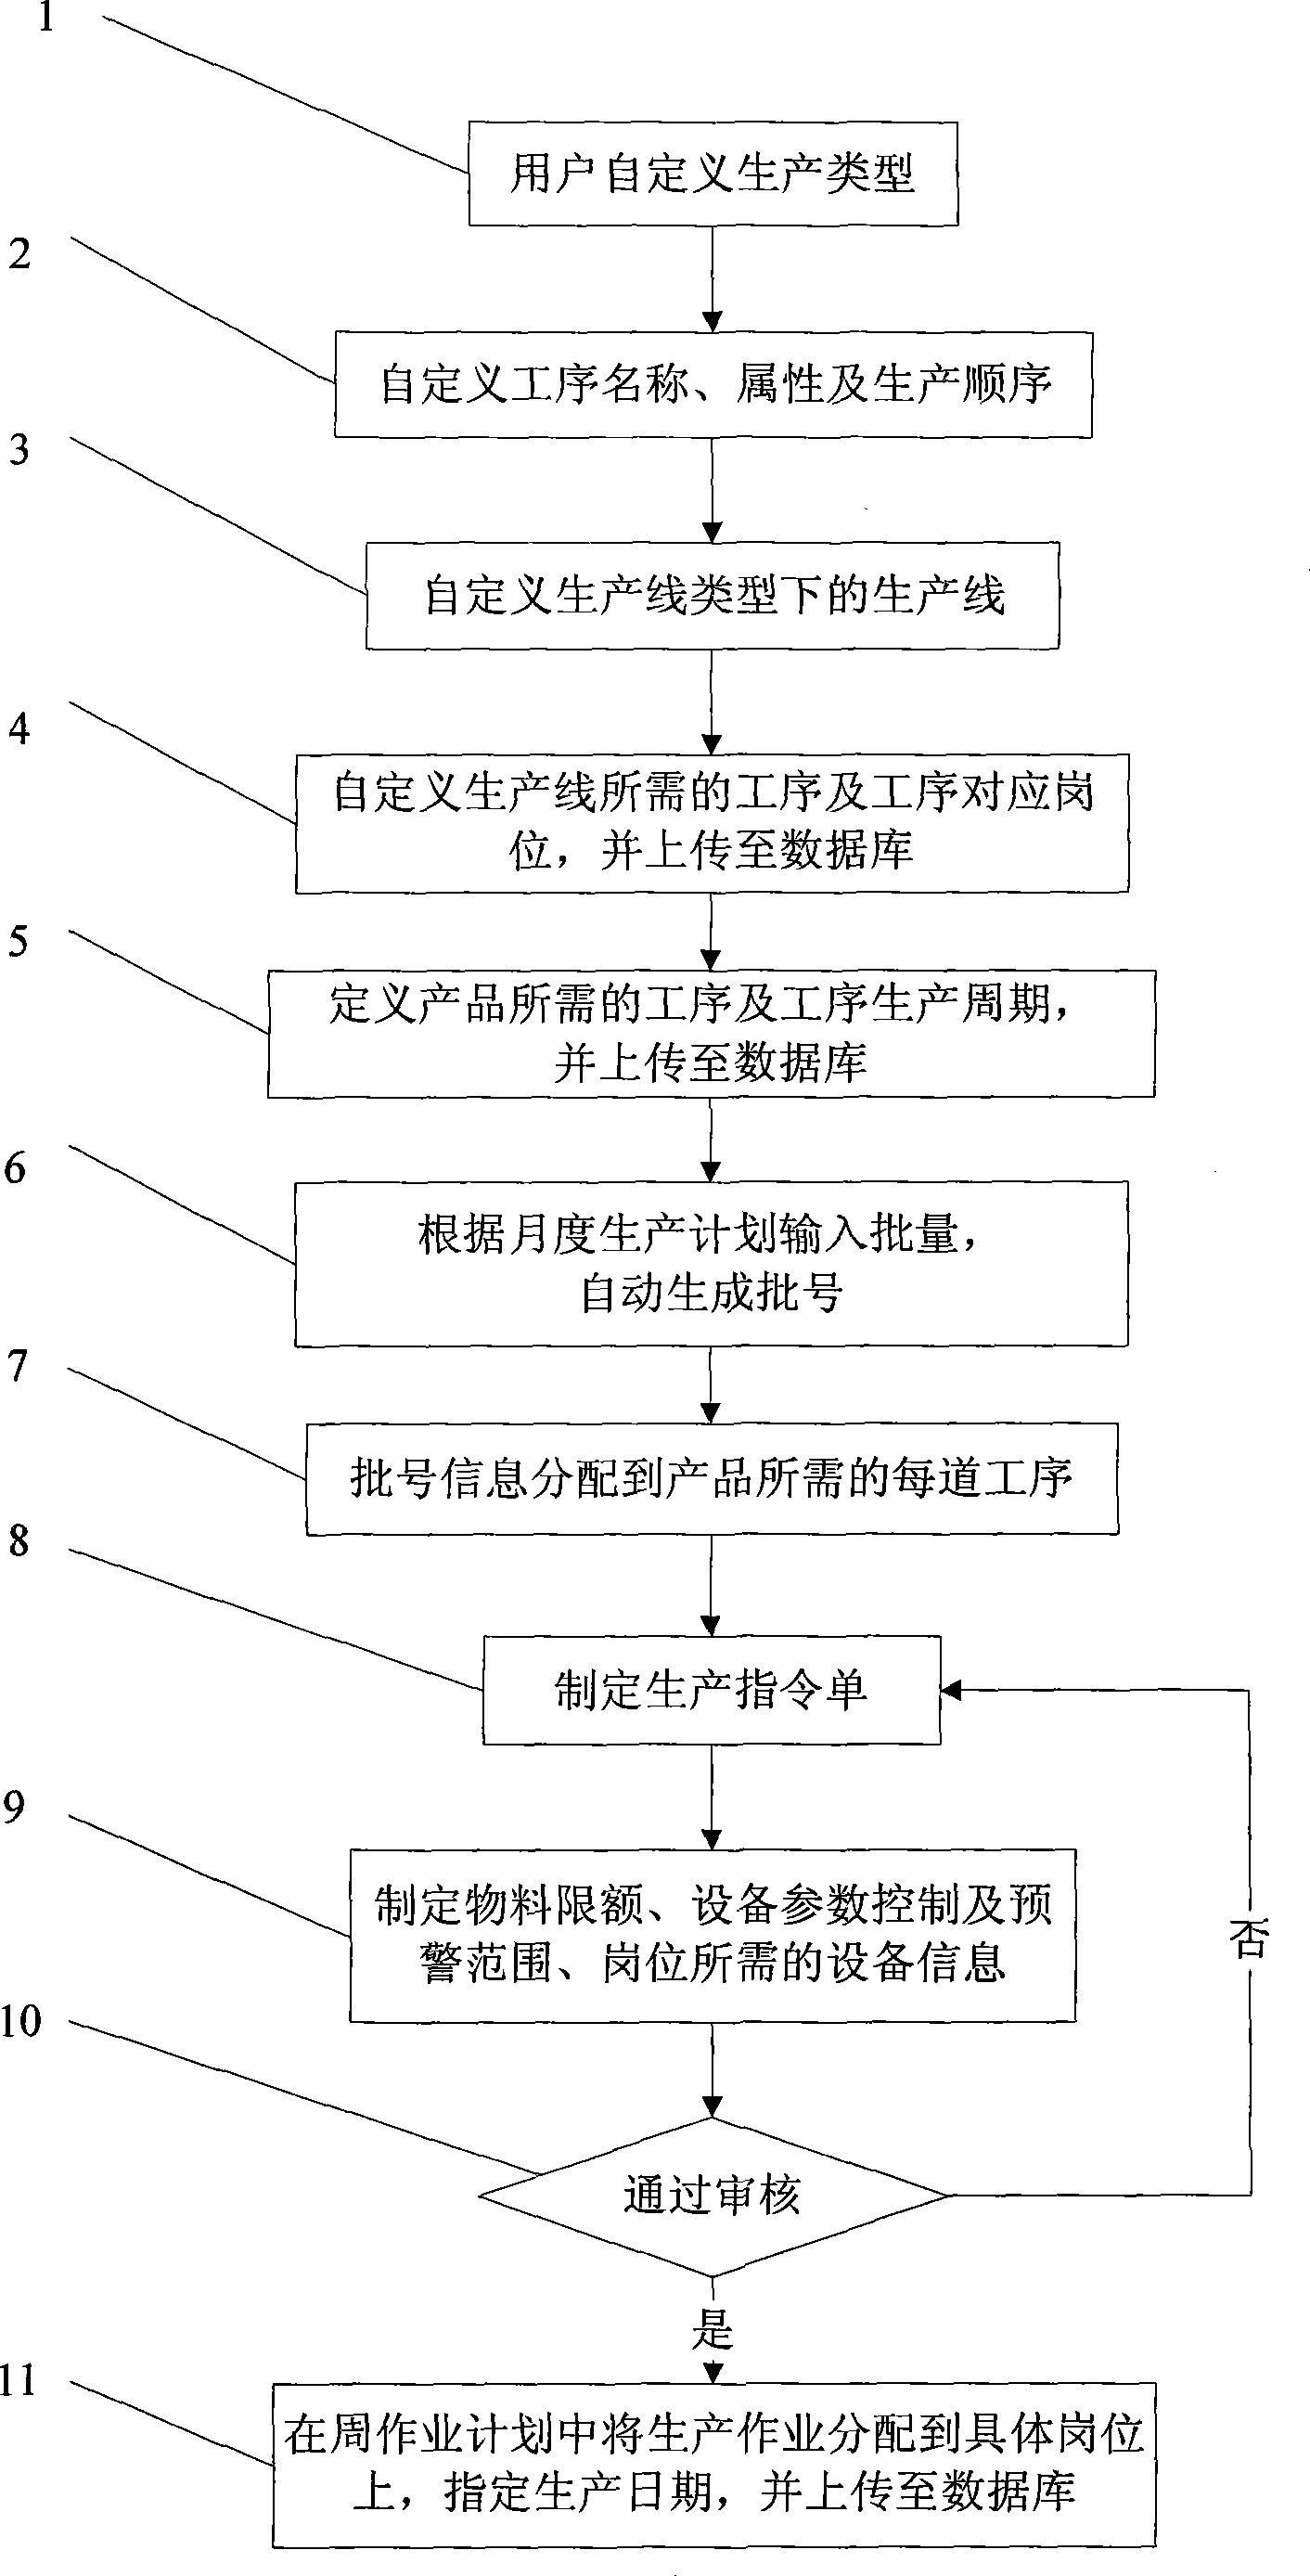 Information-based control and management method for production flow setting and week operation plan arrangement